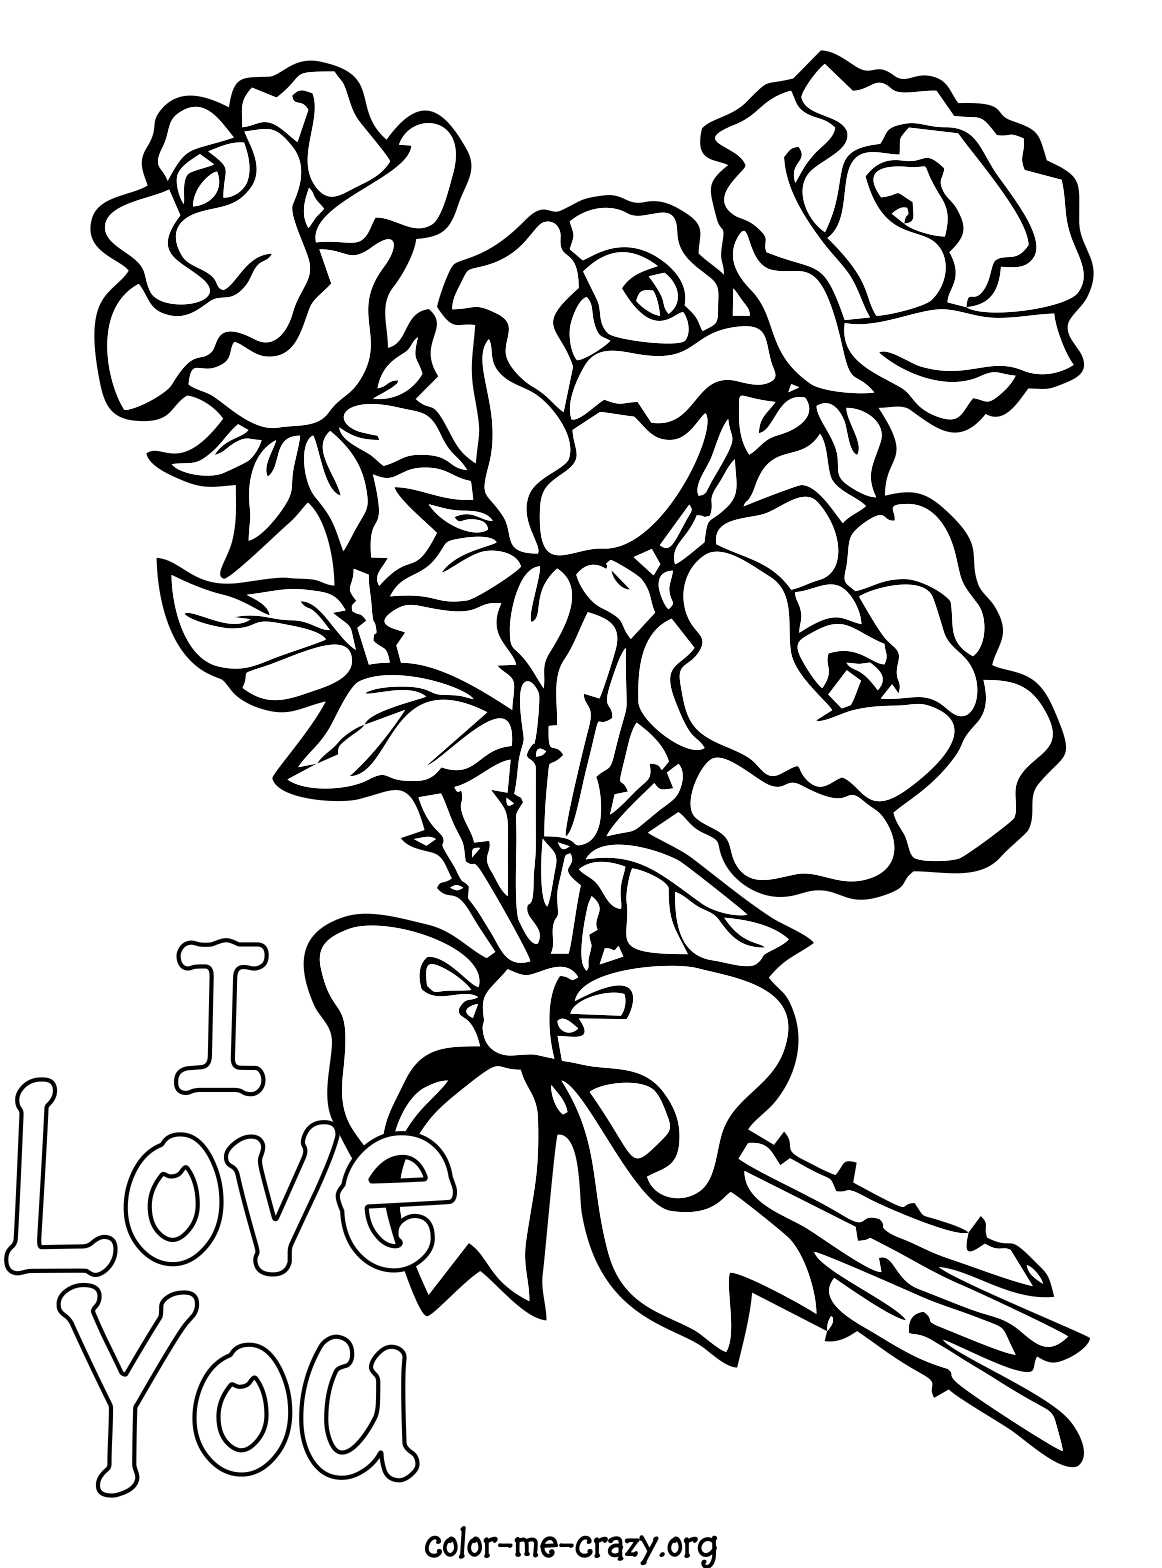 Download ColorMeCrazy.org: Valentine Coloring Pages